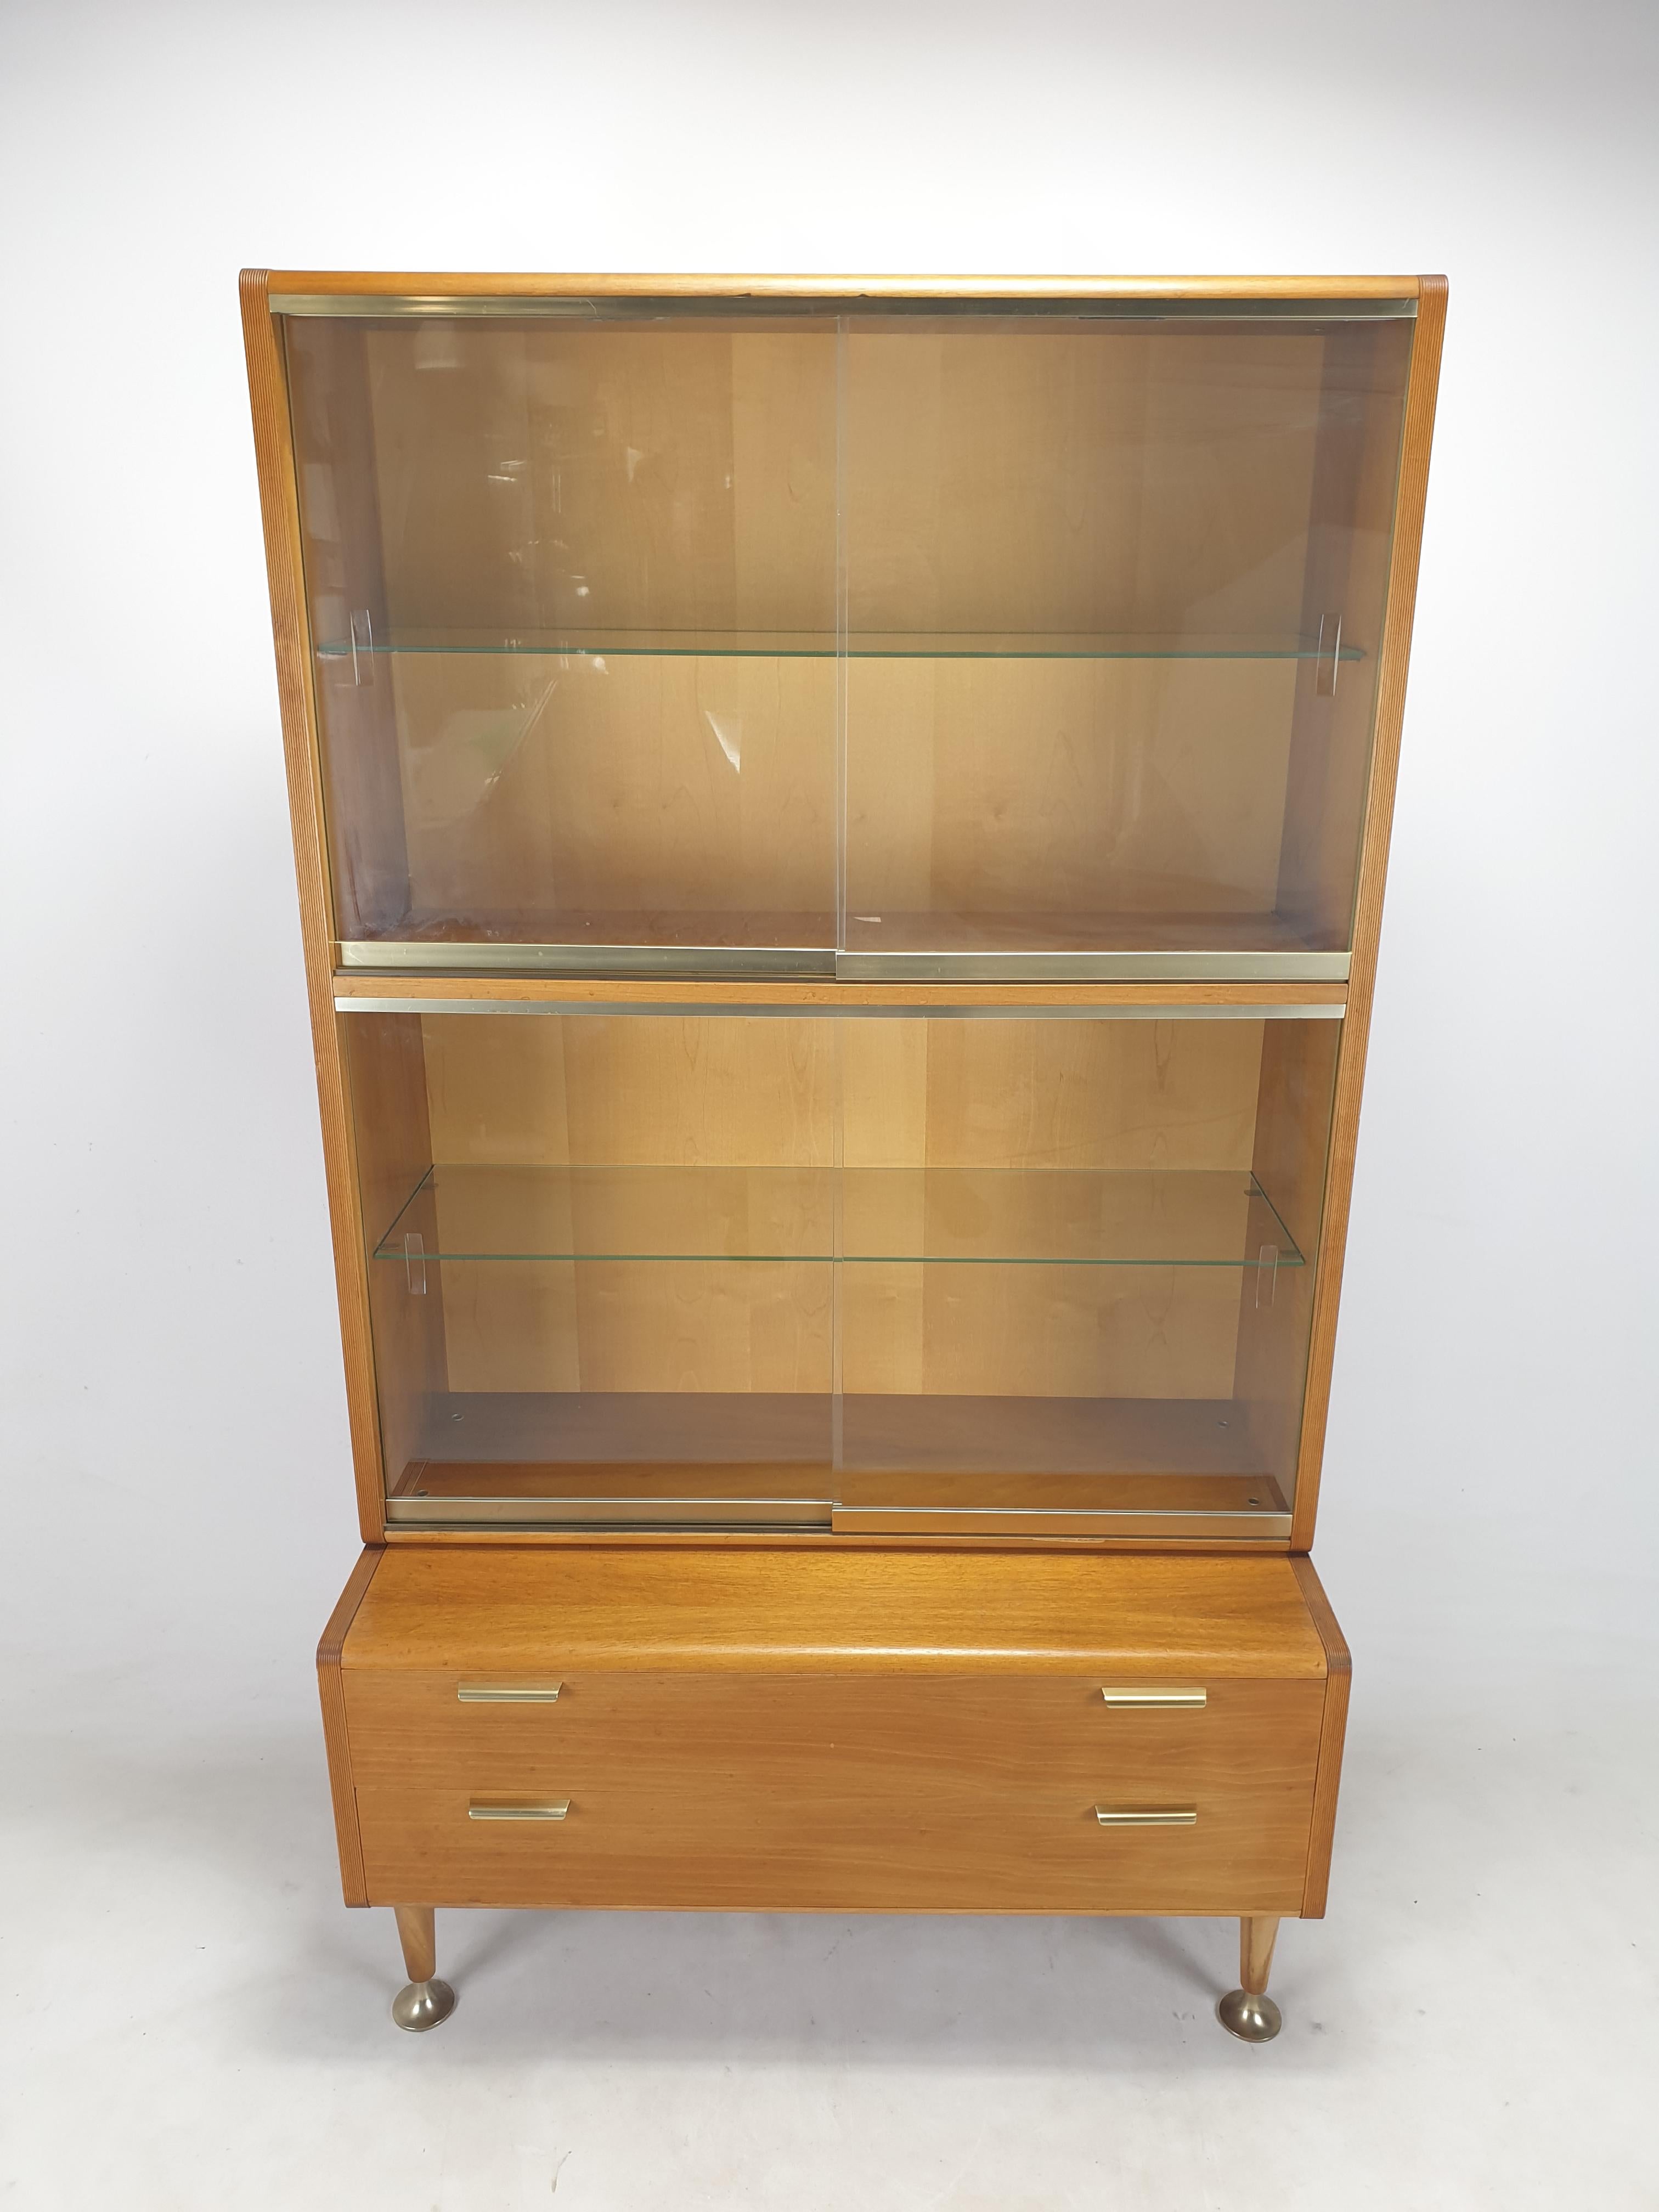 Very nice Dutch walnut cabinet, designed by A.A. Patijn for Zijlstra Joure in the 50’s. 

This high quality cabinet is composed by 2 modules. 
One is equipped with two shelves, the other big size with glass. 

It has brass details and it is